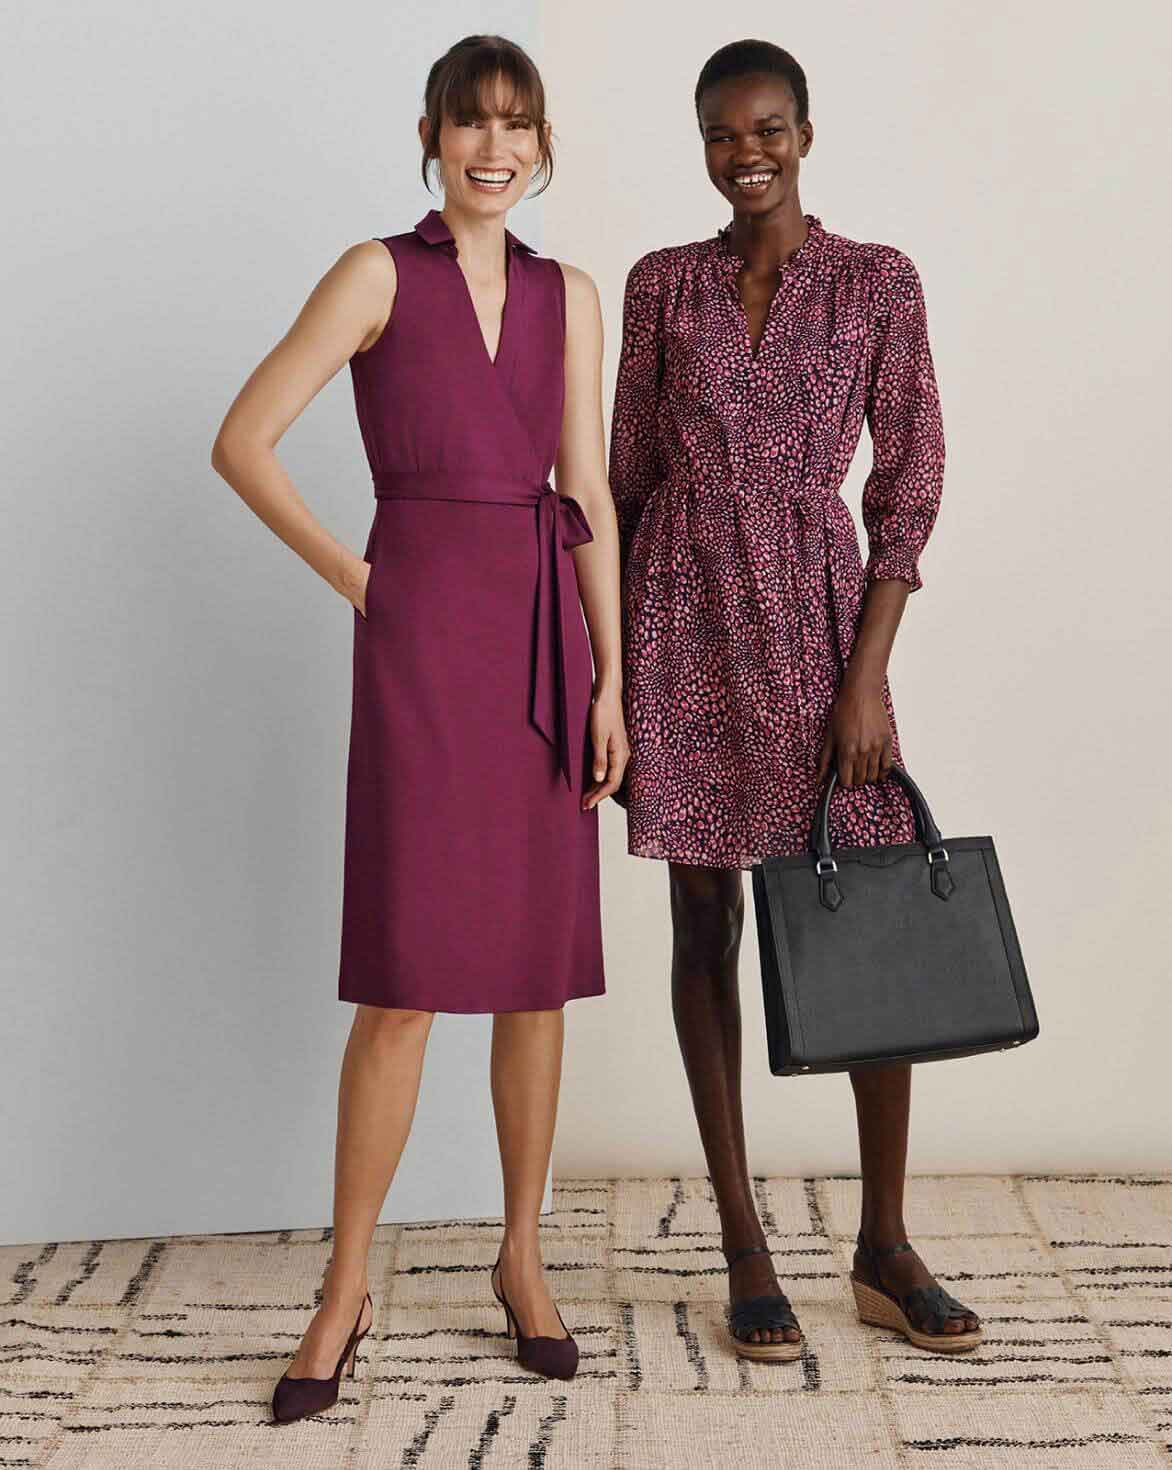 Two Hobbs models photographed wearing a plum wrap dress and pink leopard mini dress with coordinating accessories.